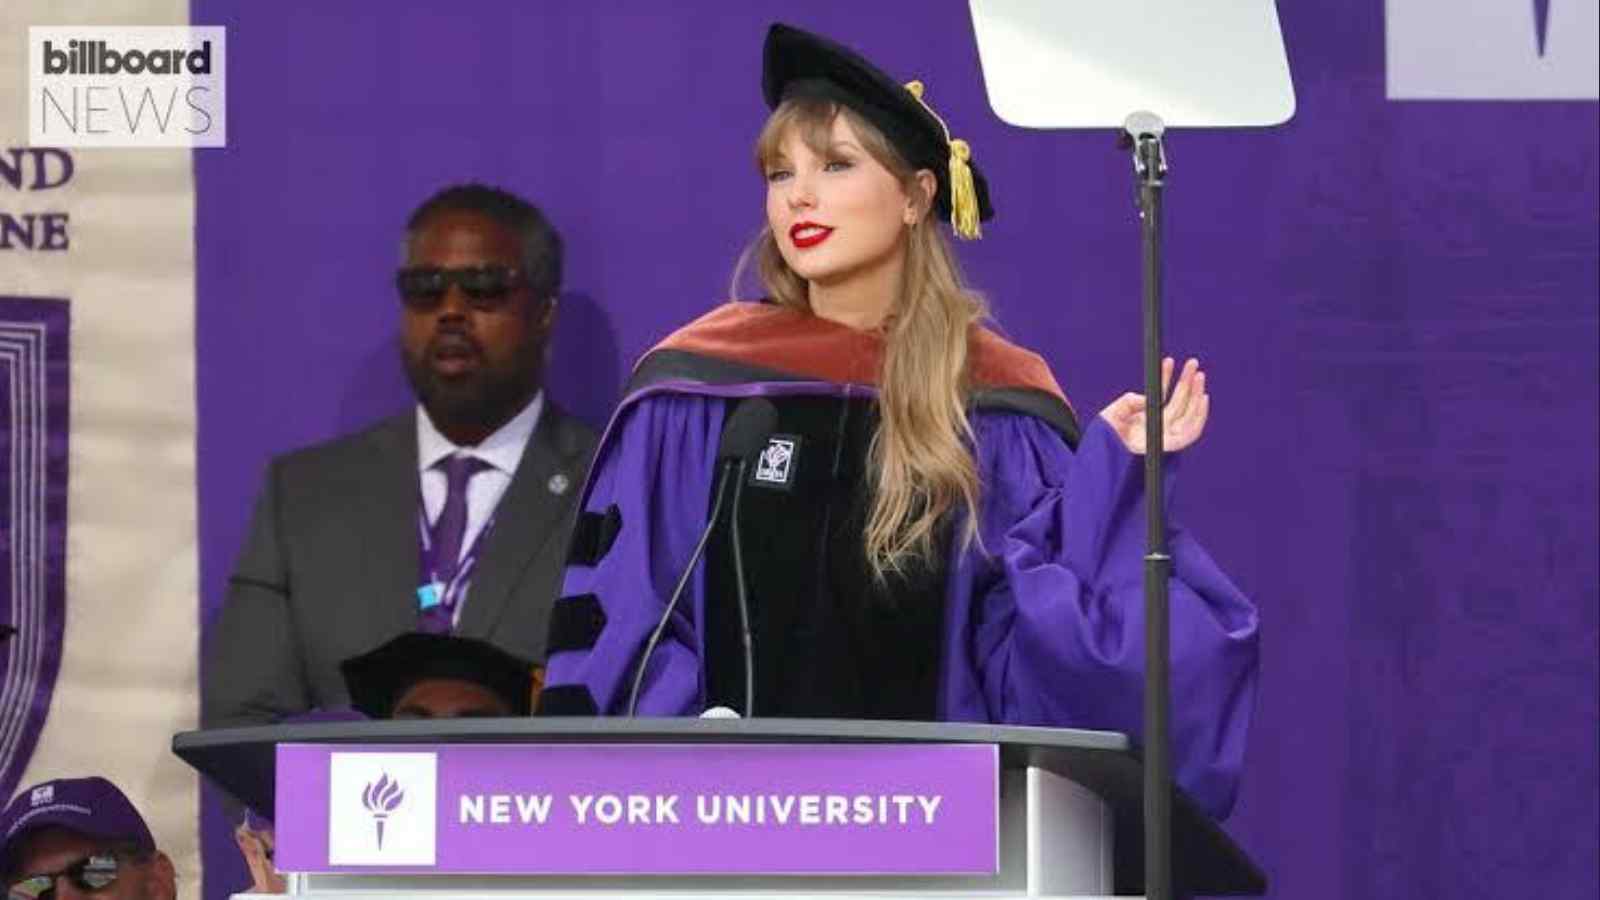 Taylor Swift at NYU for her honorary doctorate